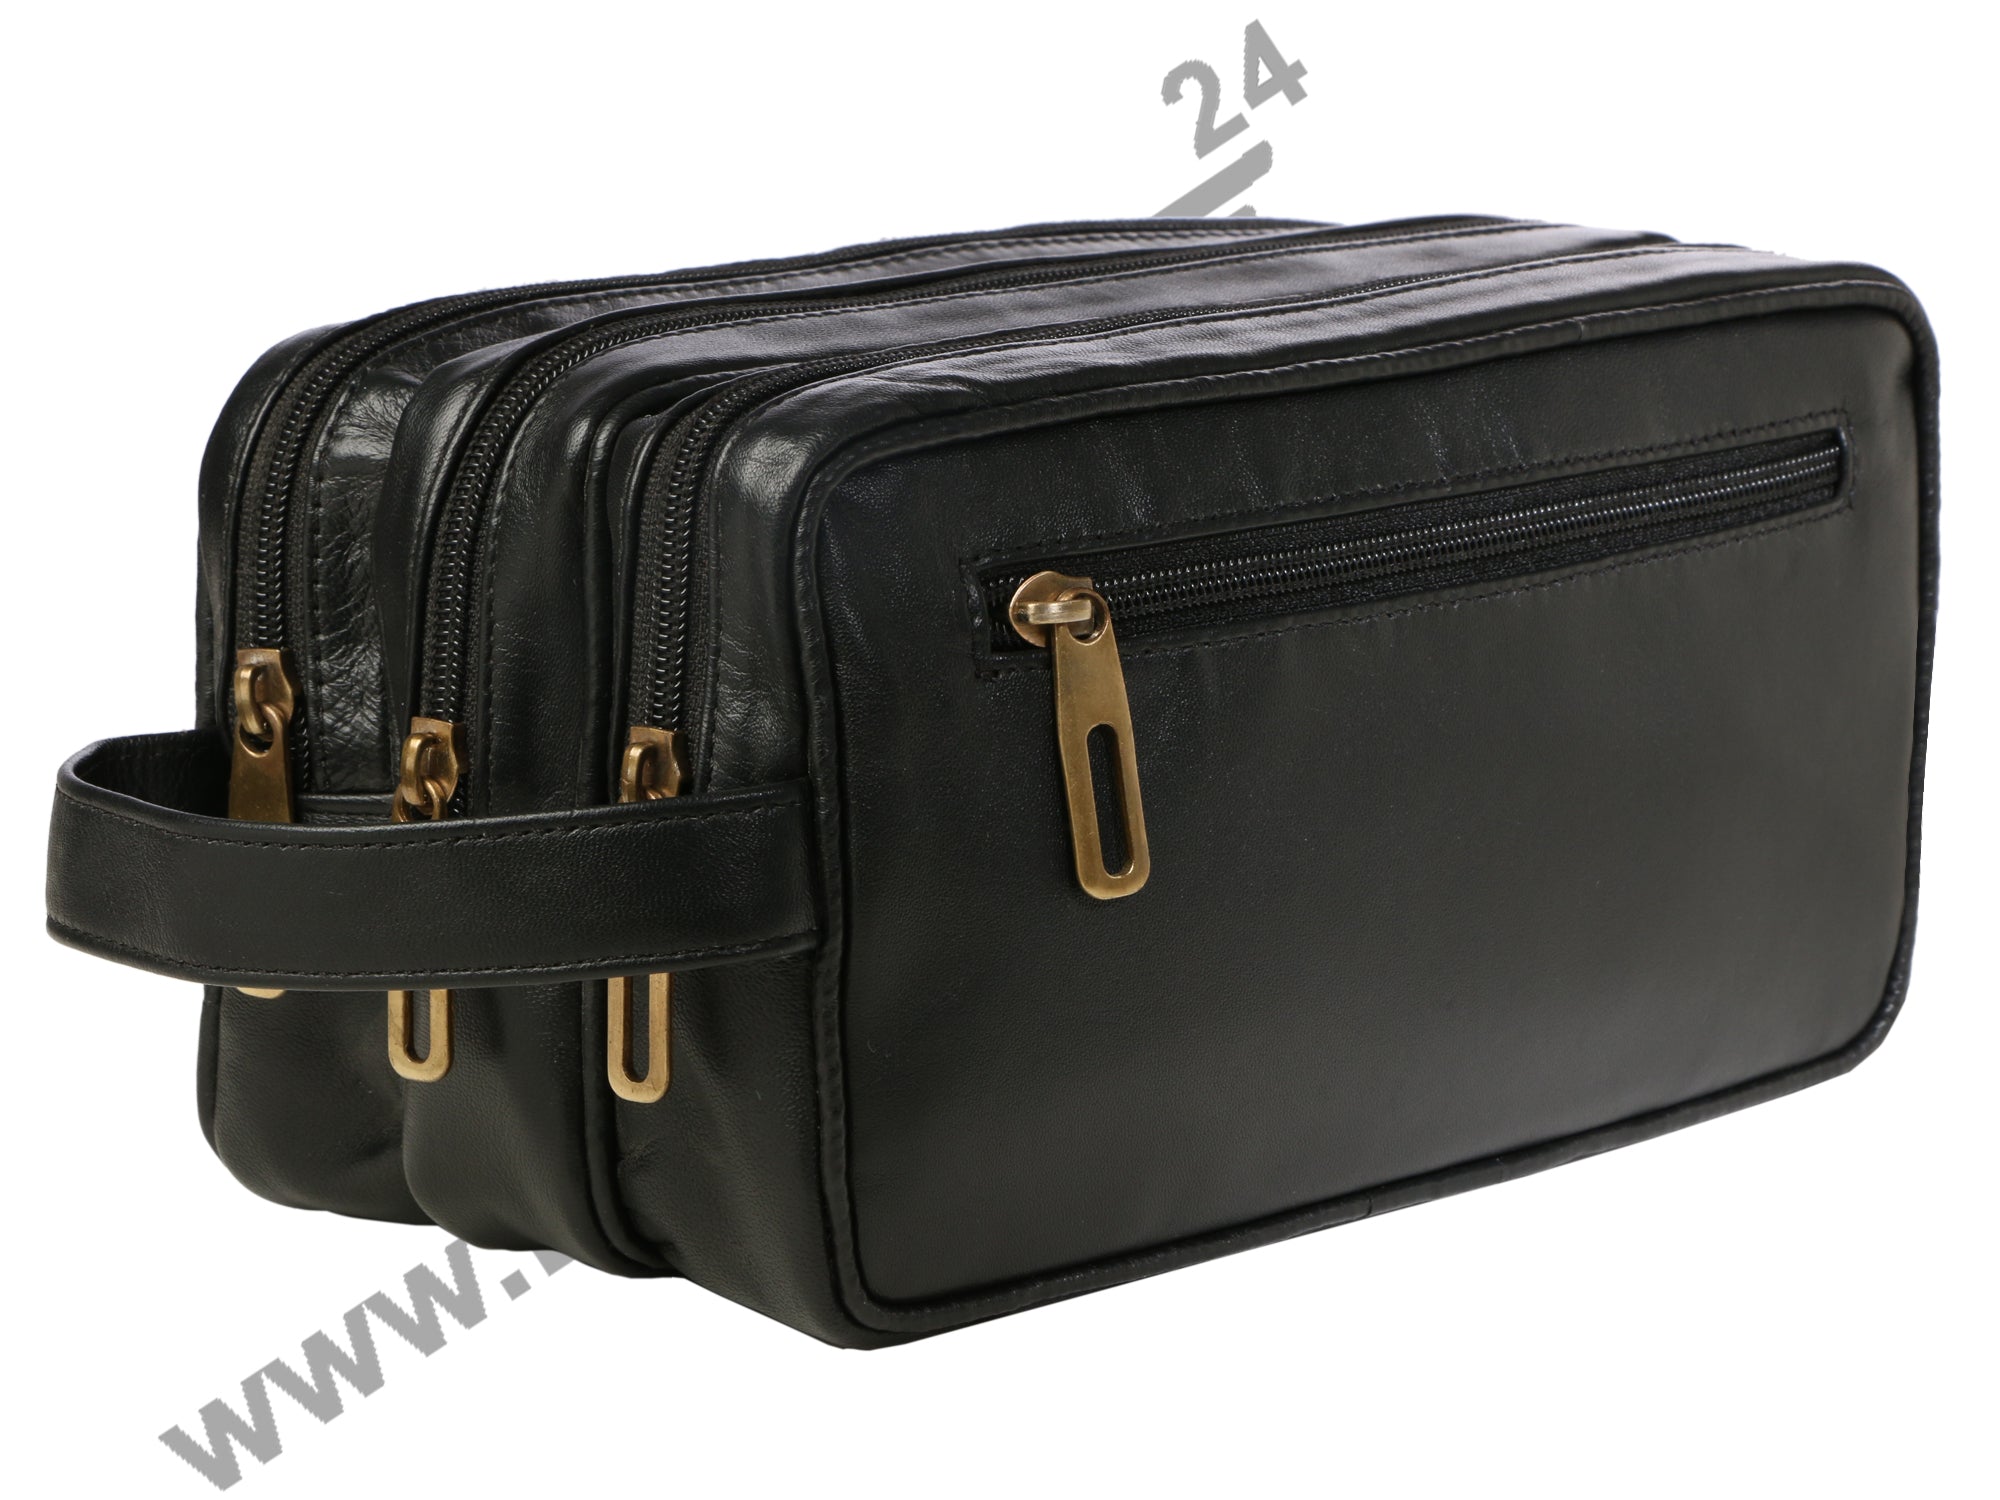 Side view of 3 Zip Dopp Kit.  Three compartments are zipped. One side zip is also visible. Dopp kit is black in color.